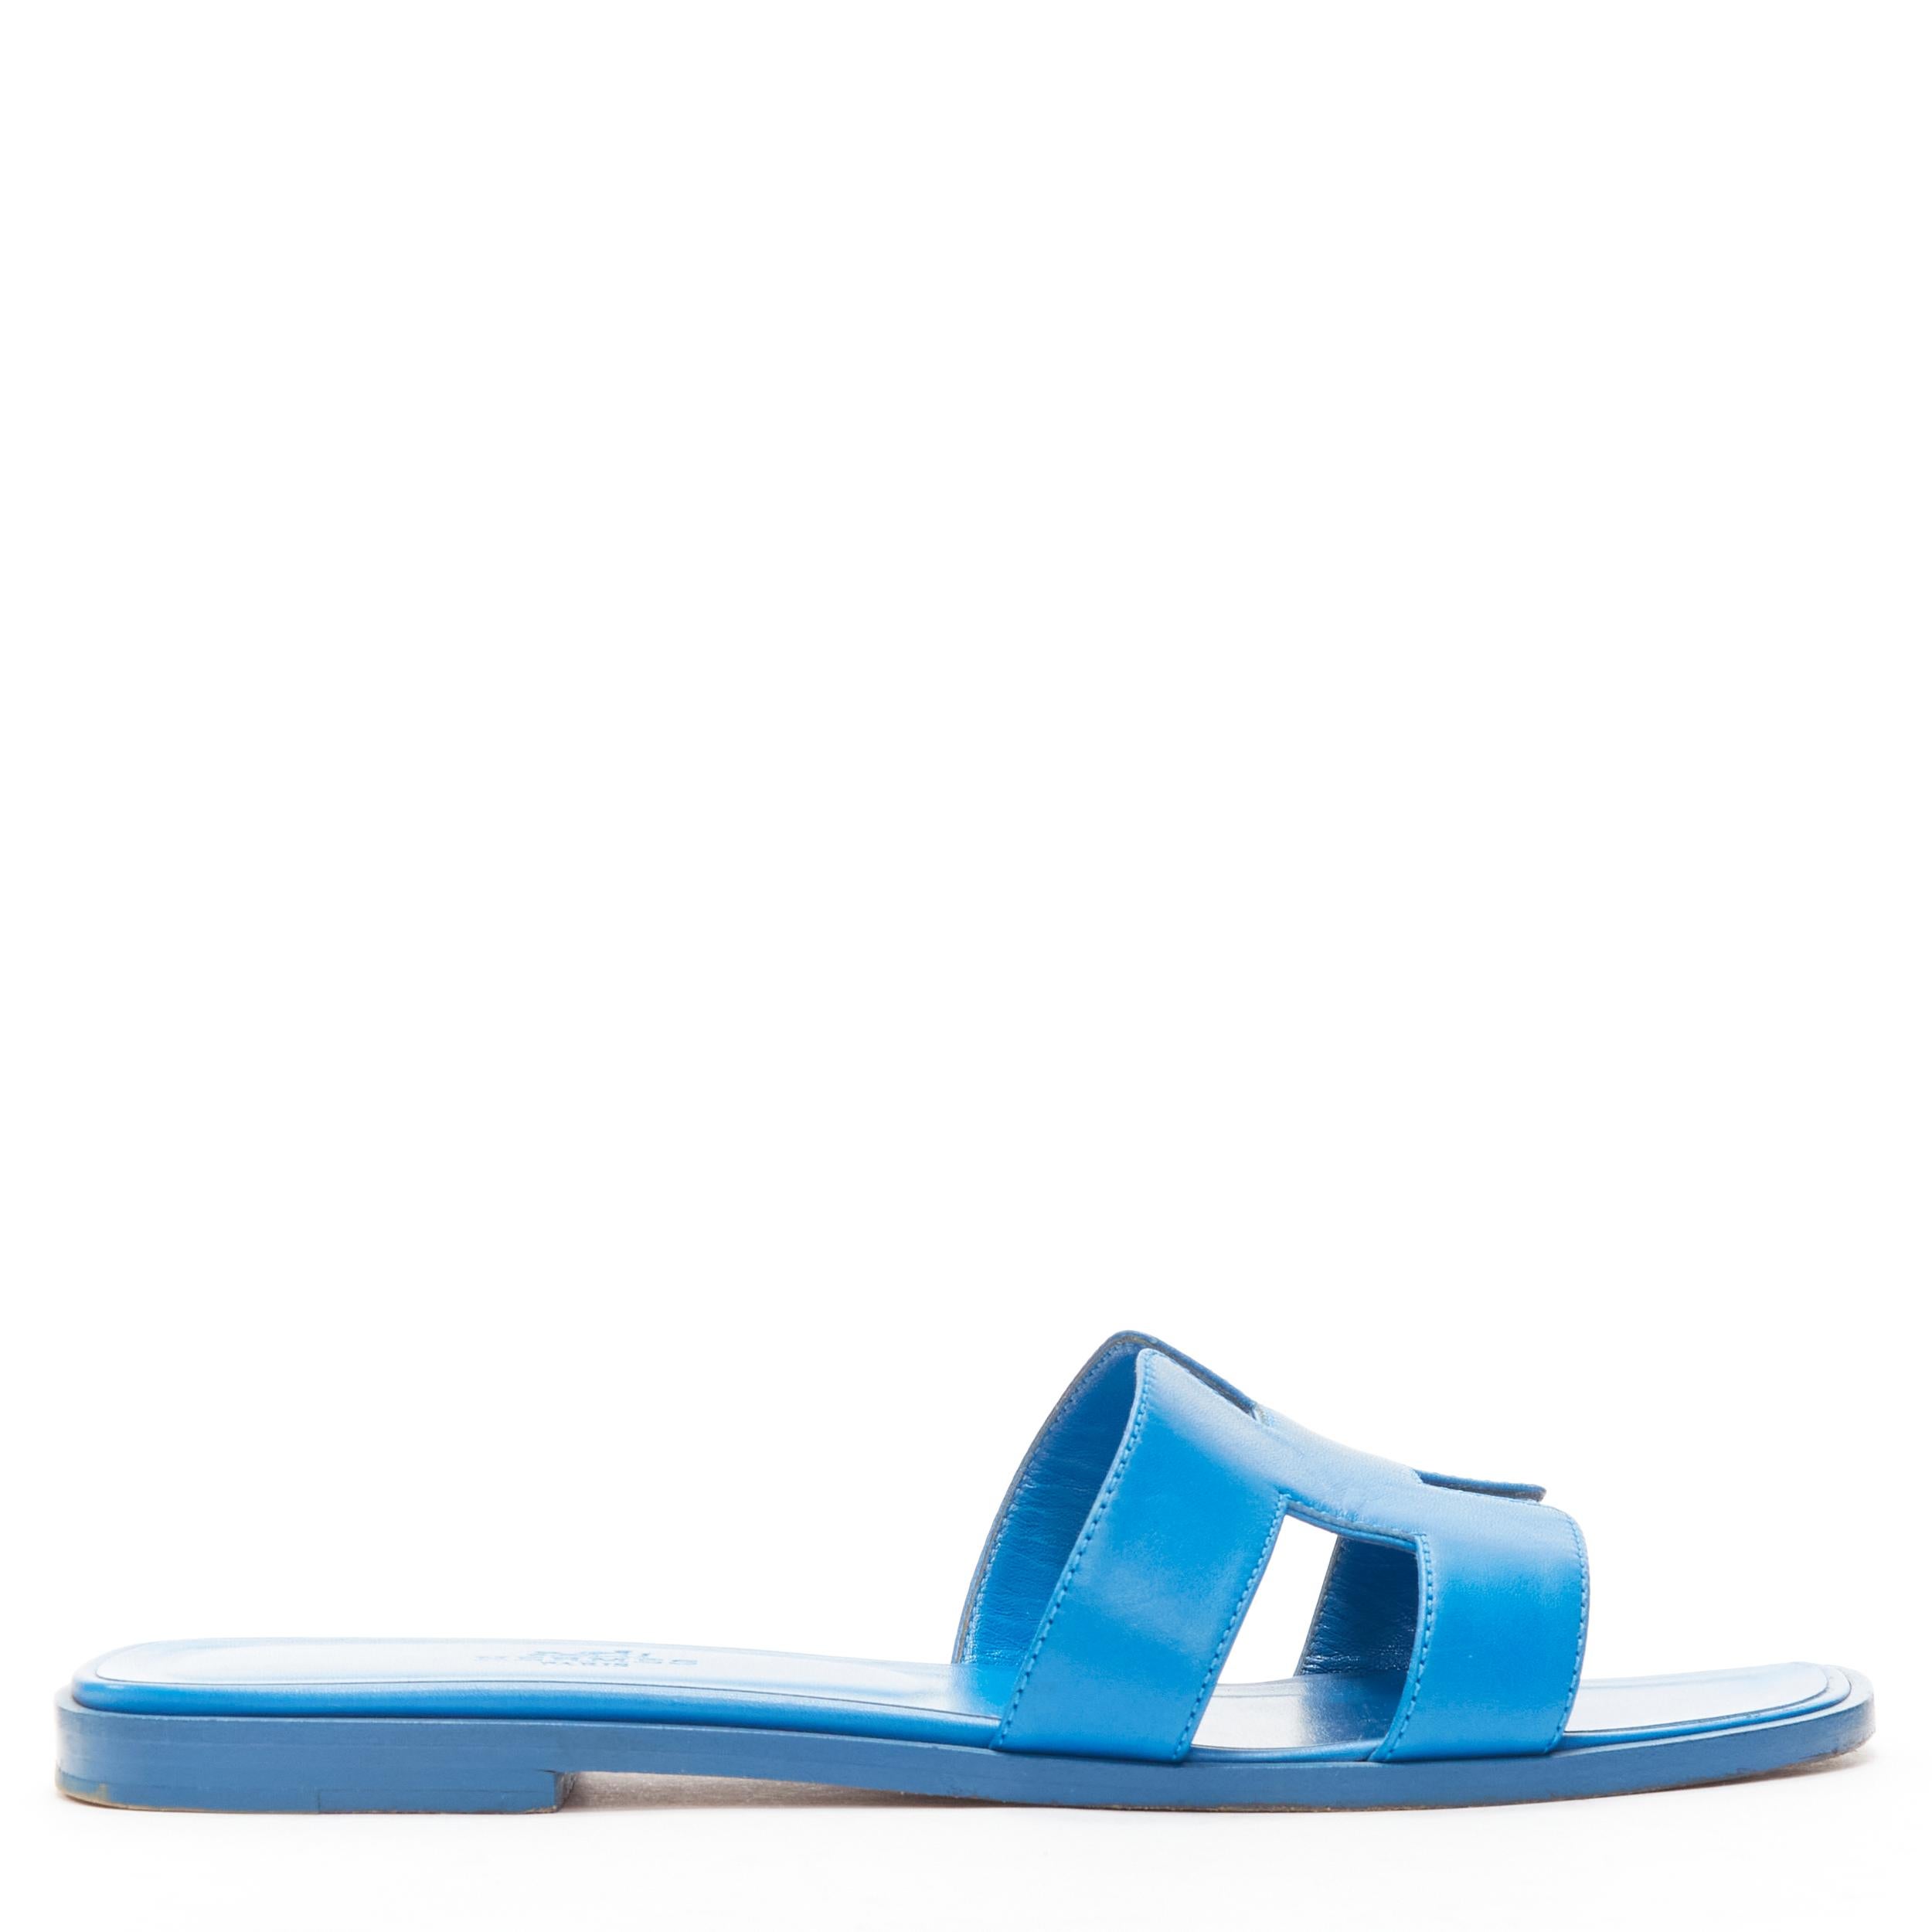 HERMES Oran cobalt blue smooth leather H flat sandals EU37.5
Reference: LNKO/A02143
Brand: Hermes
Model: Oran
Material: Leather
Color: Blue
Pattern: Solid
Closure: Slip On
Lining: Blue Leather
Made in: Italy

CONDITION:
Condition: Very good, this